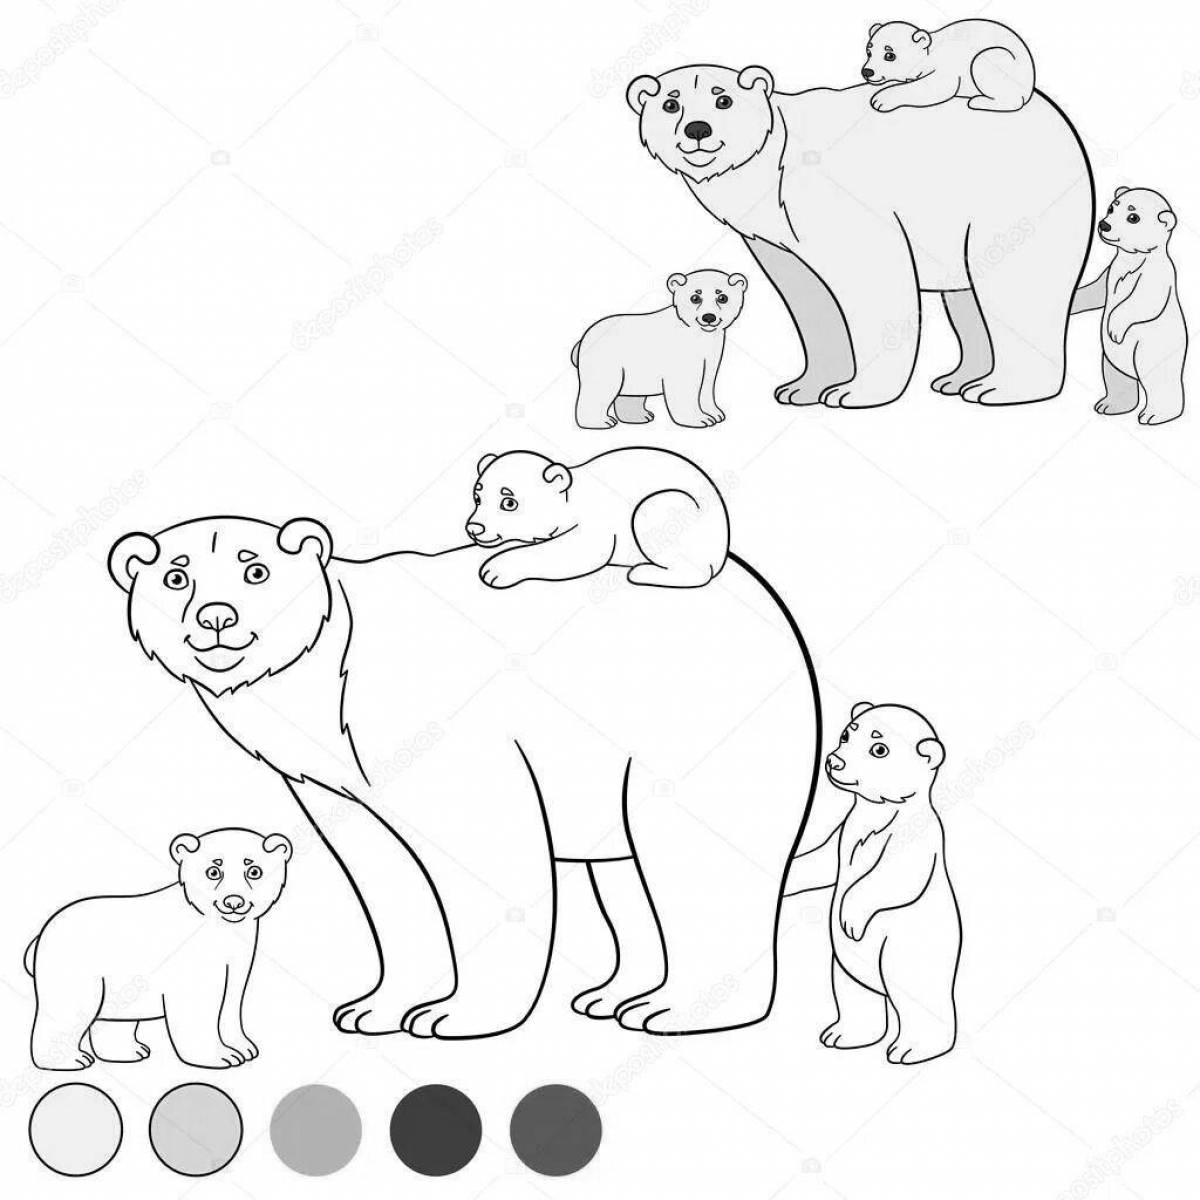 Adorable bear family coloring page